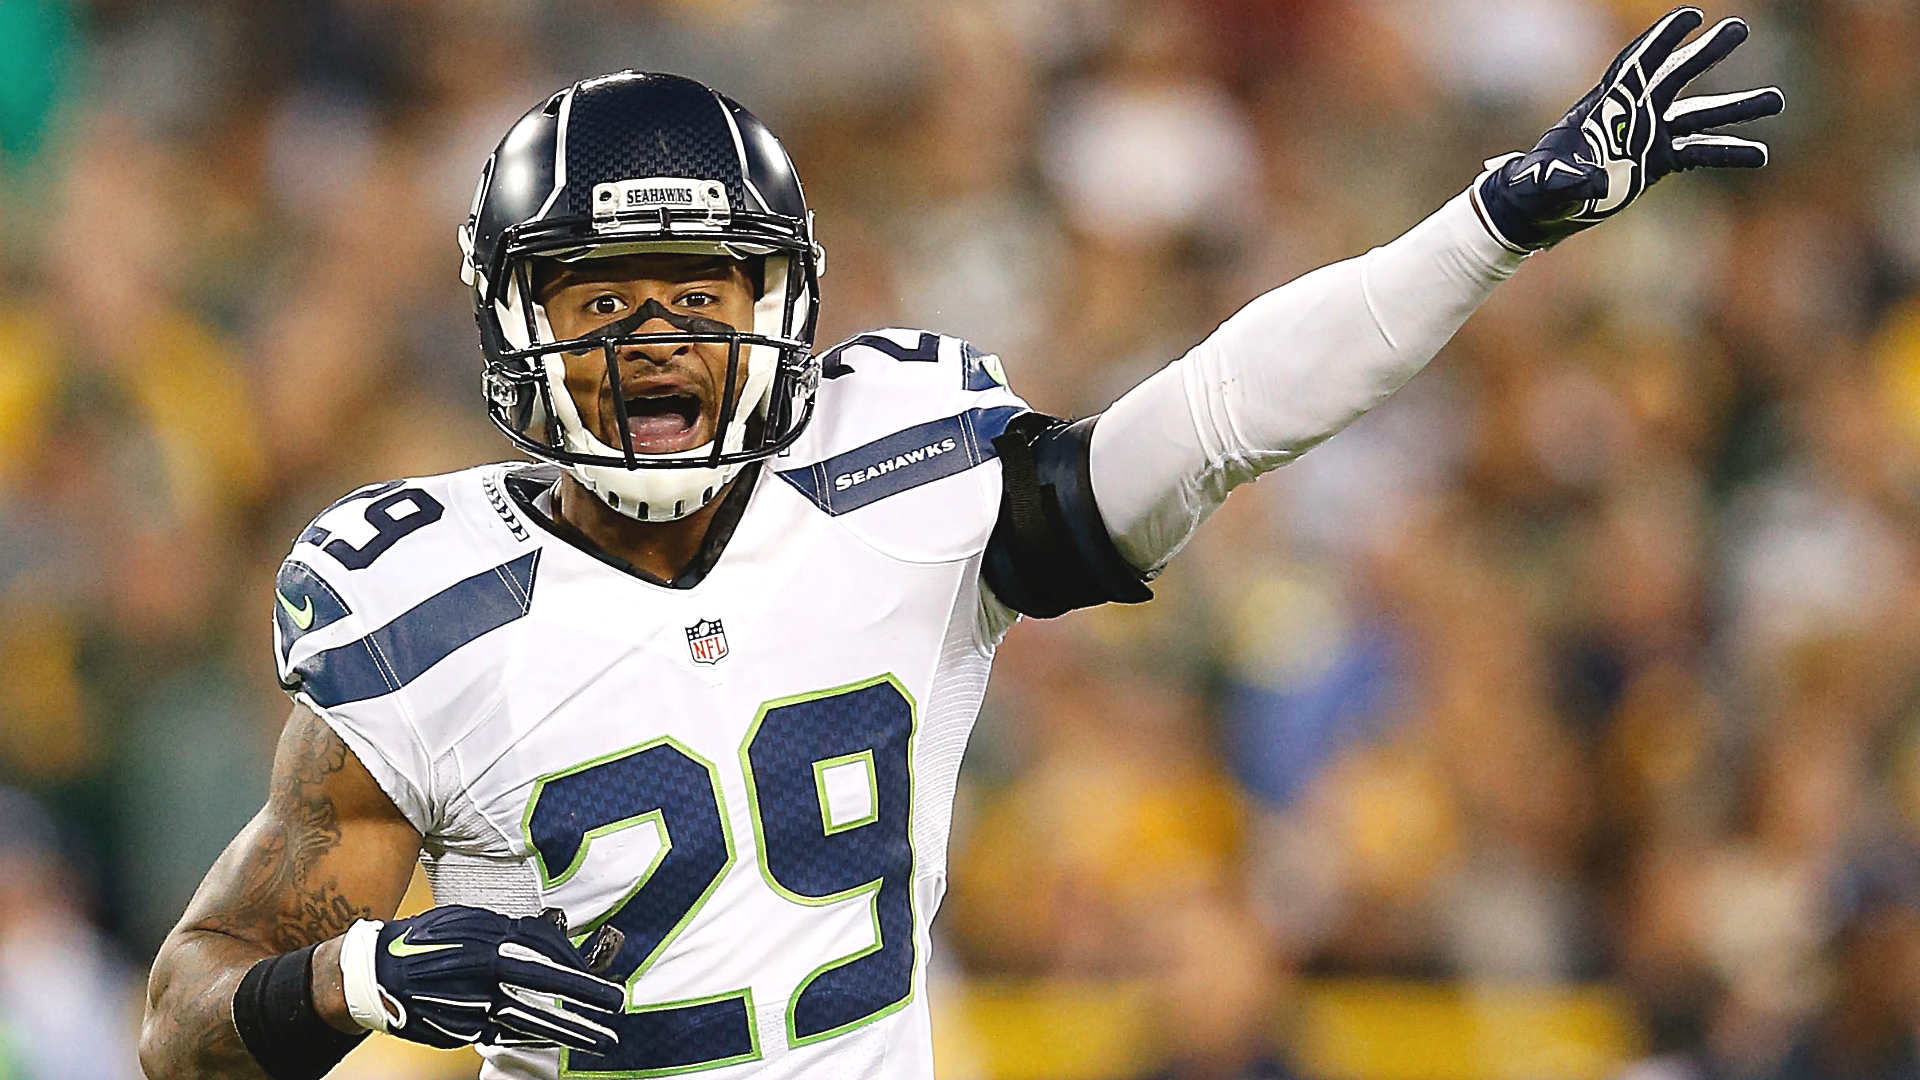 Earl Thomas 'way ahead of schedule' in recovery from gruesome leg